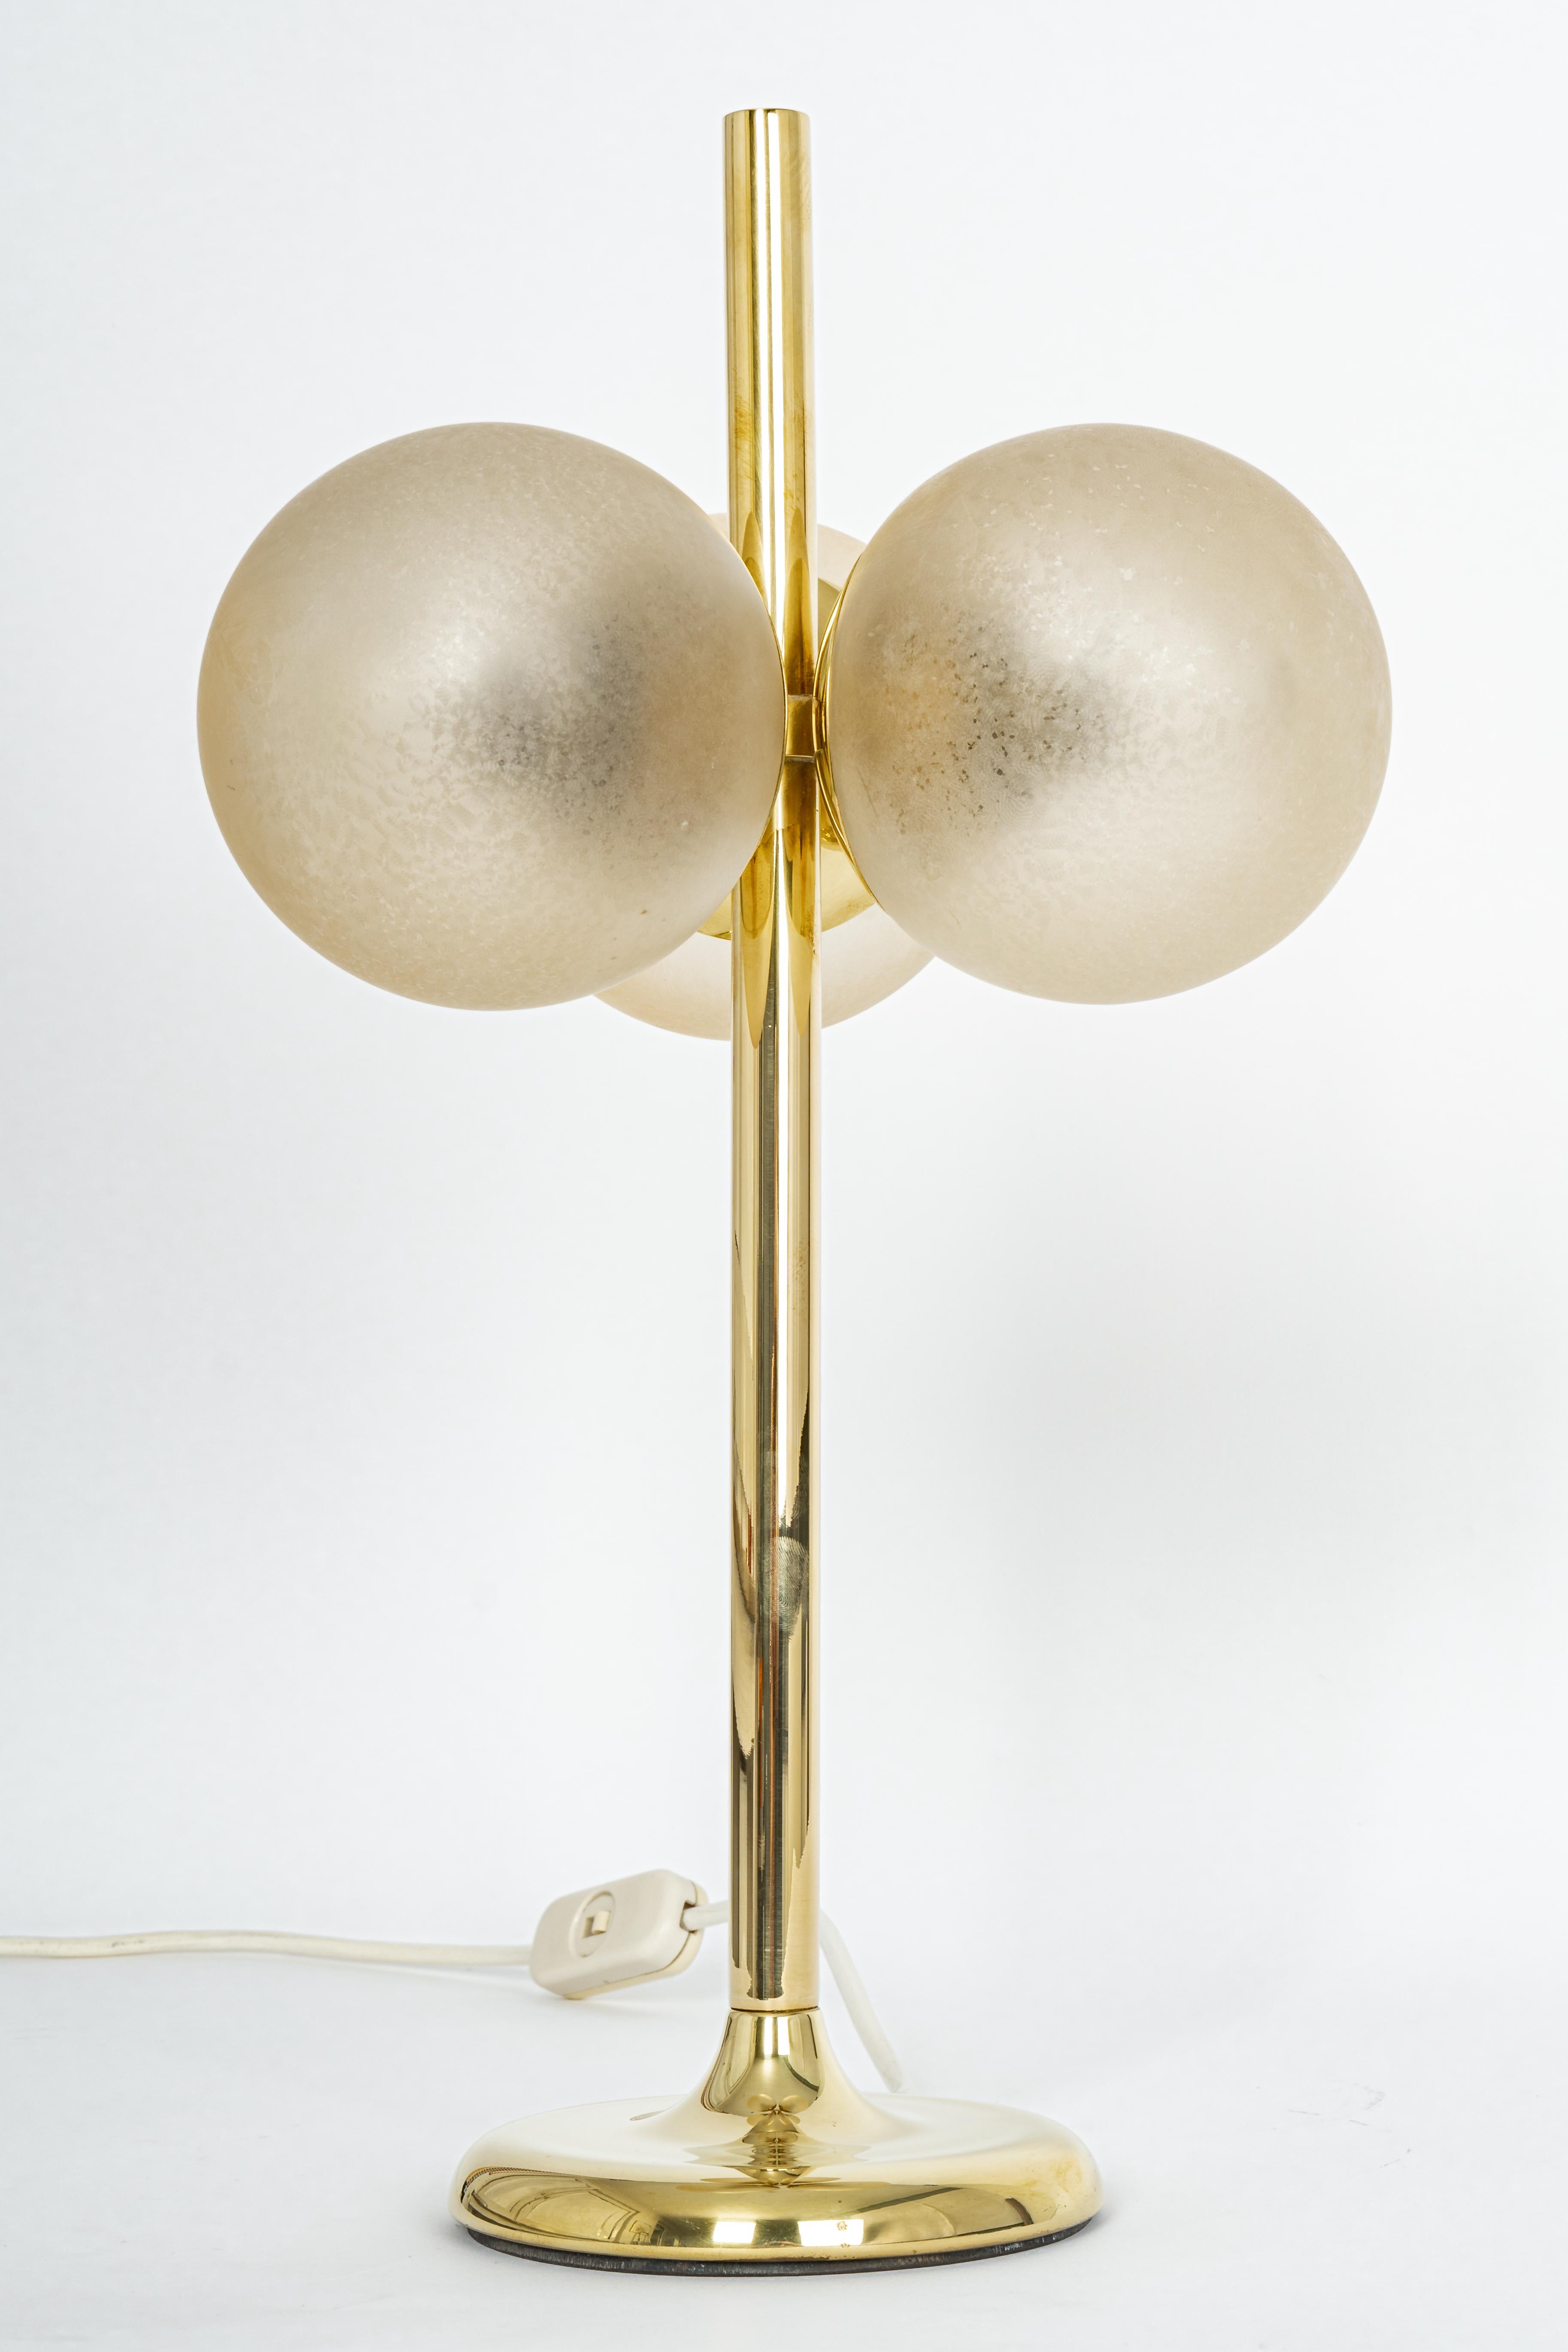 Stunning pair of large brass table lamps by Kaiser, Germany, 1970s
It’s composed of three light brown art glass pieces on a brass frame.

High quality and in very good condition. Cleaned, well-wired and ready to use. 

Each table lamp requires